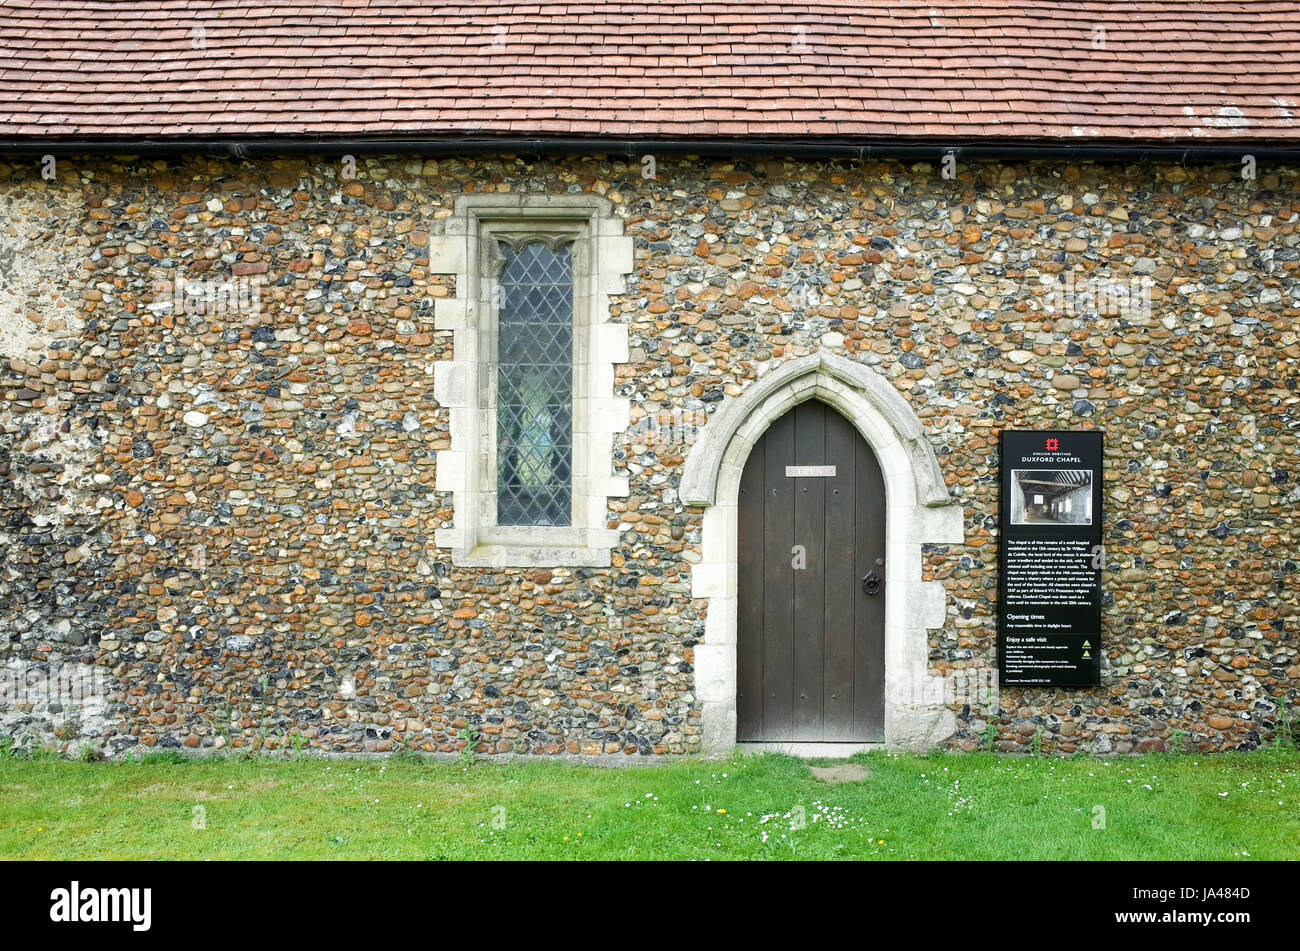 Duxford Chapel in Whittlesford, Cambridgeshire. This is a c14 Chantry Chapel that may once have been used as a leper hospital. English Heritage run. Stock Photo